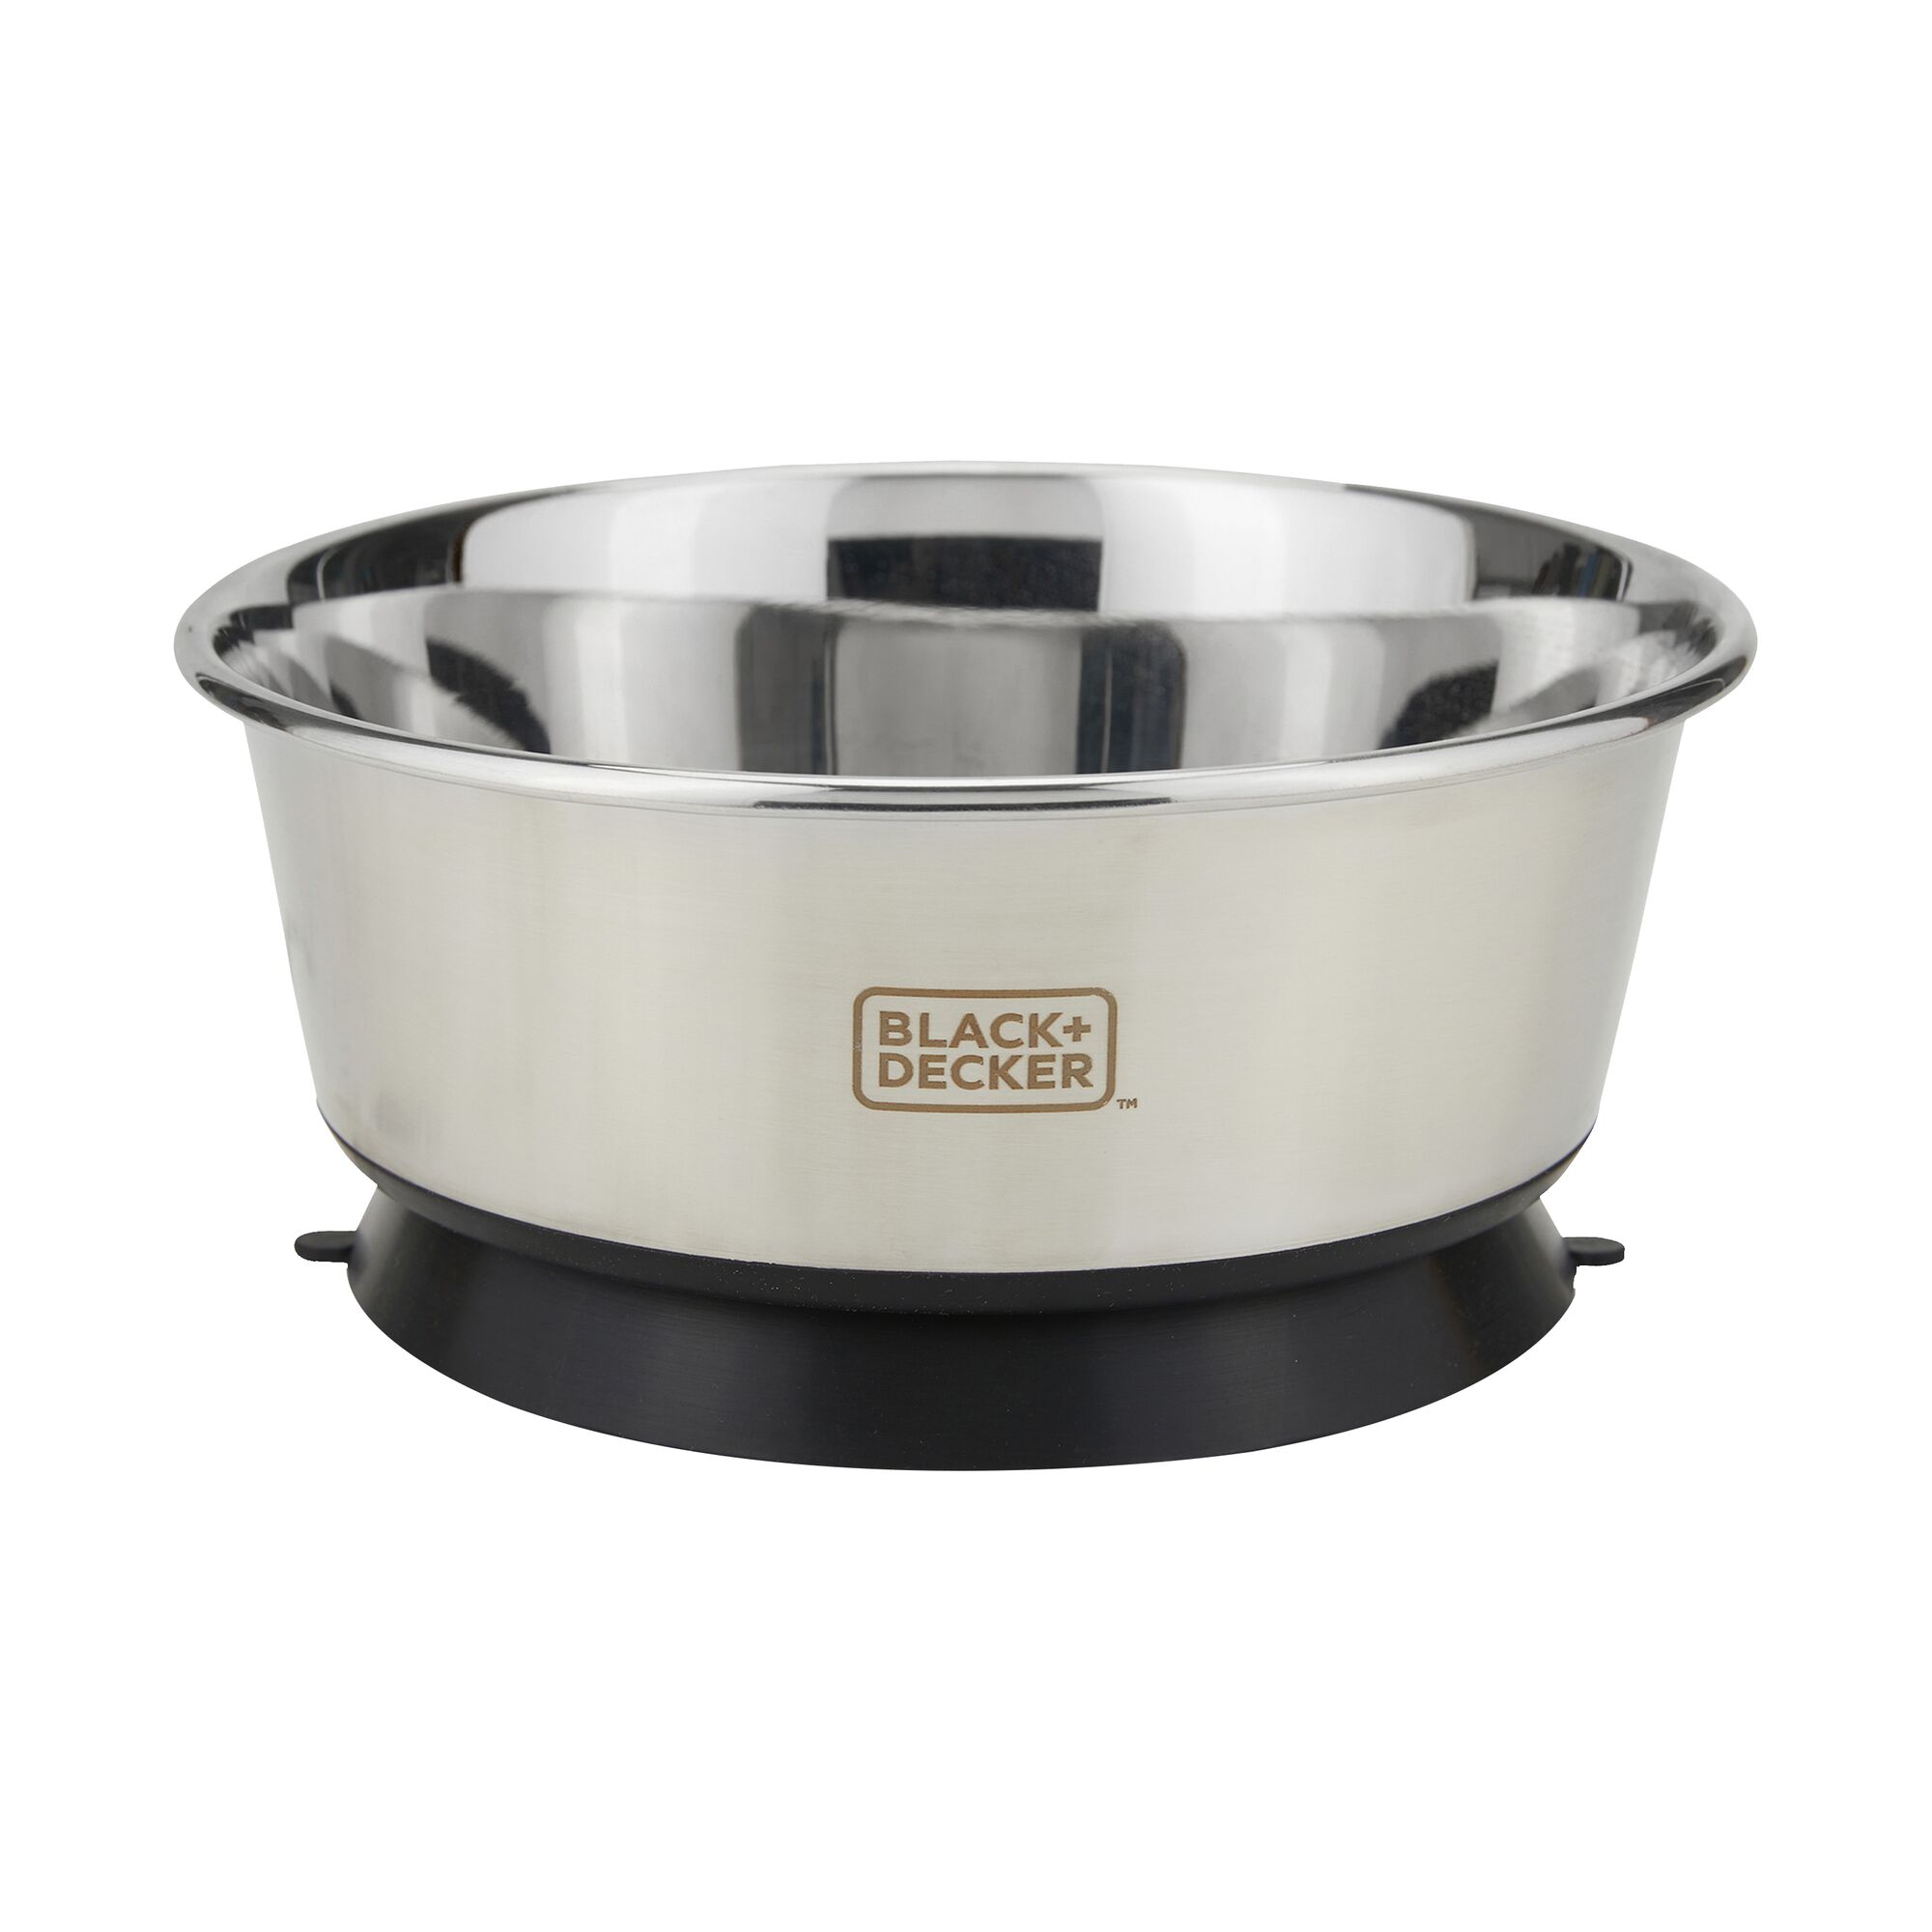 Side view of Stainless Steel Black and Decker 8 Cup or 64 oz. Suction Bowl